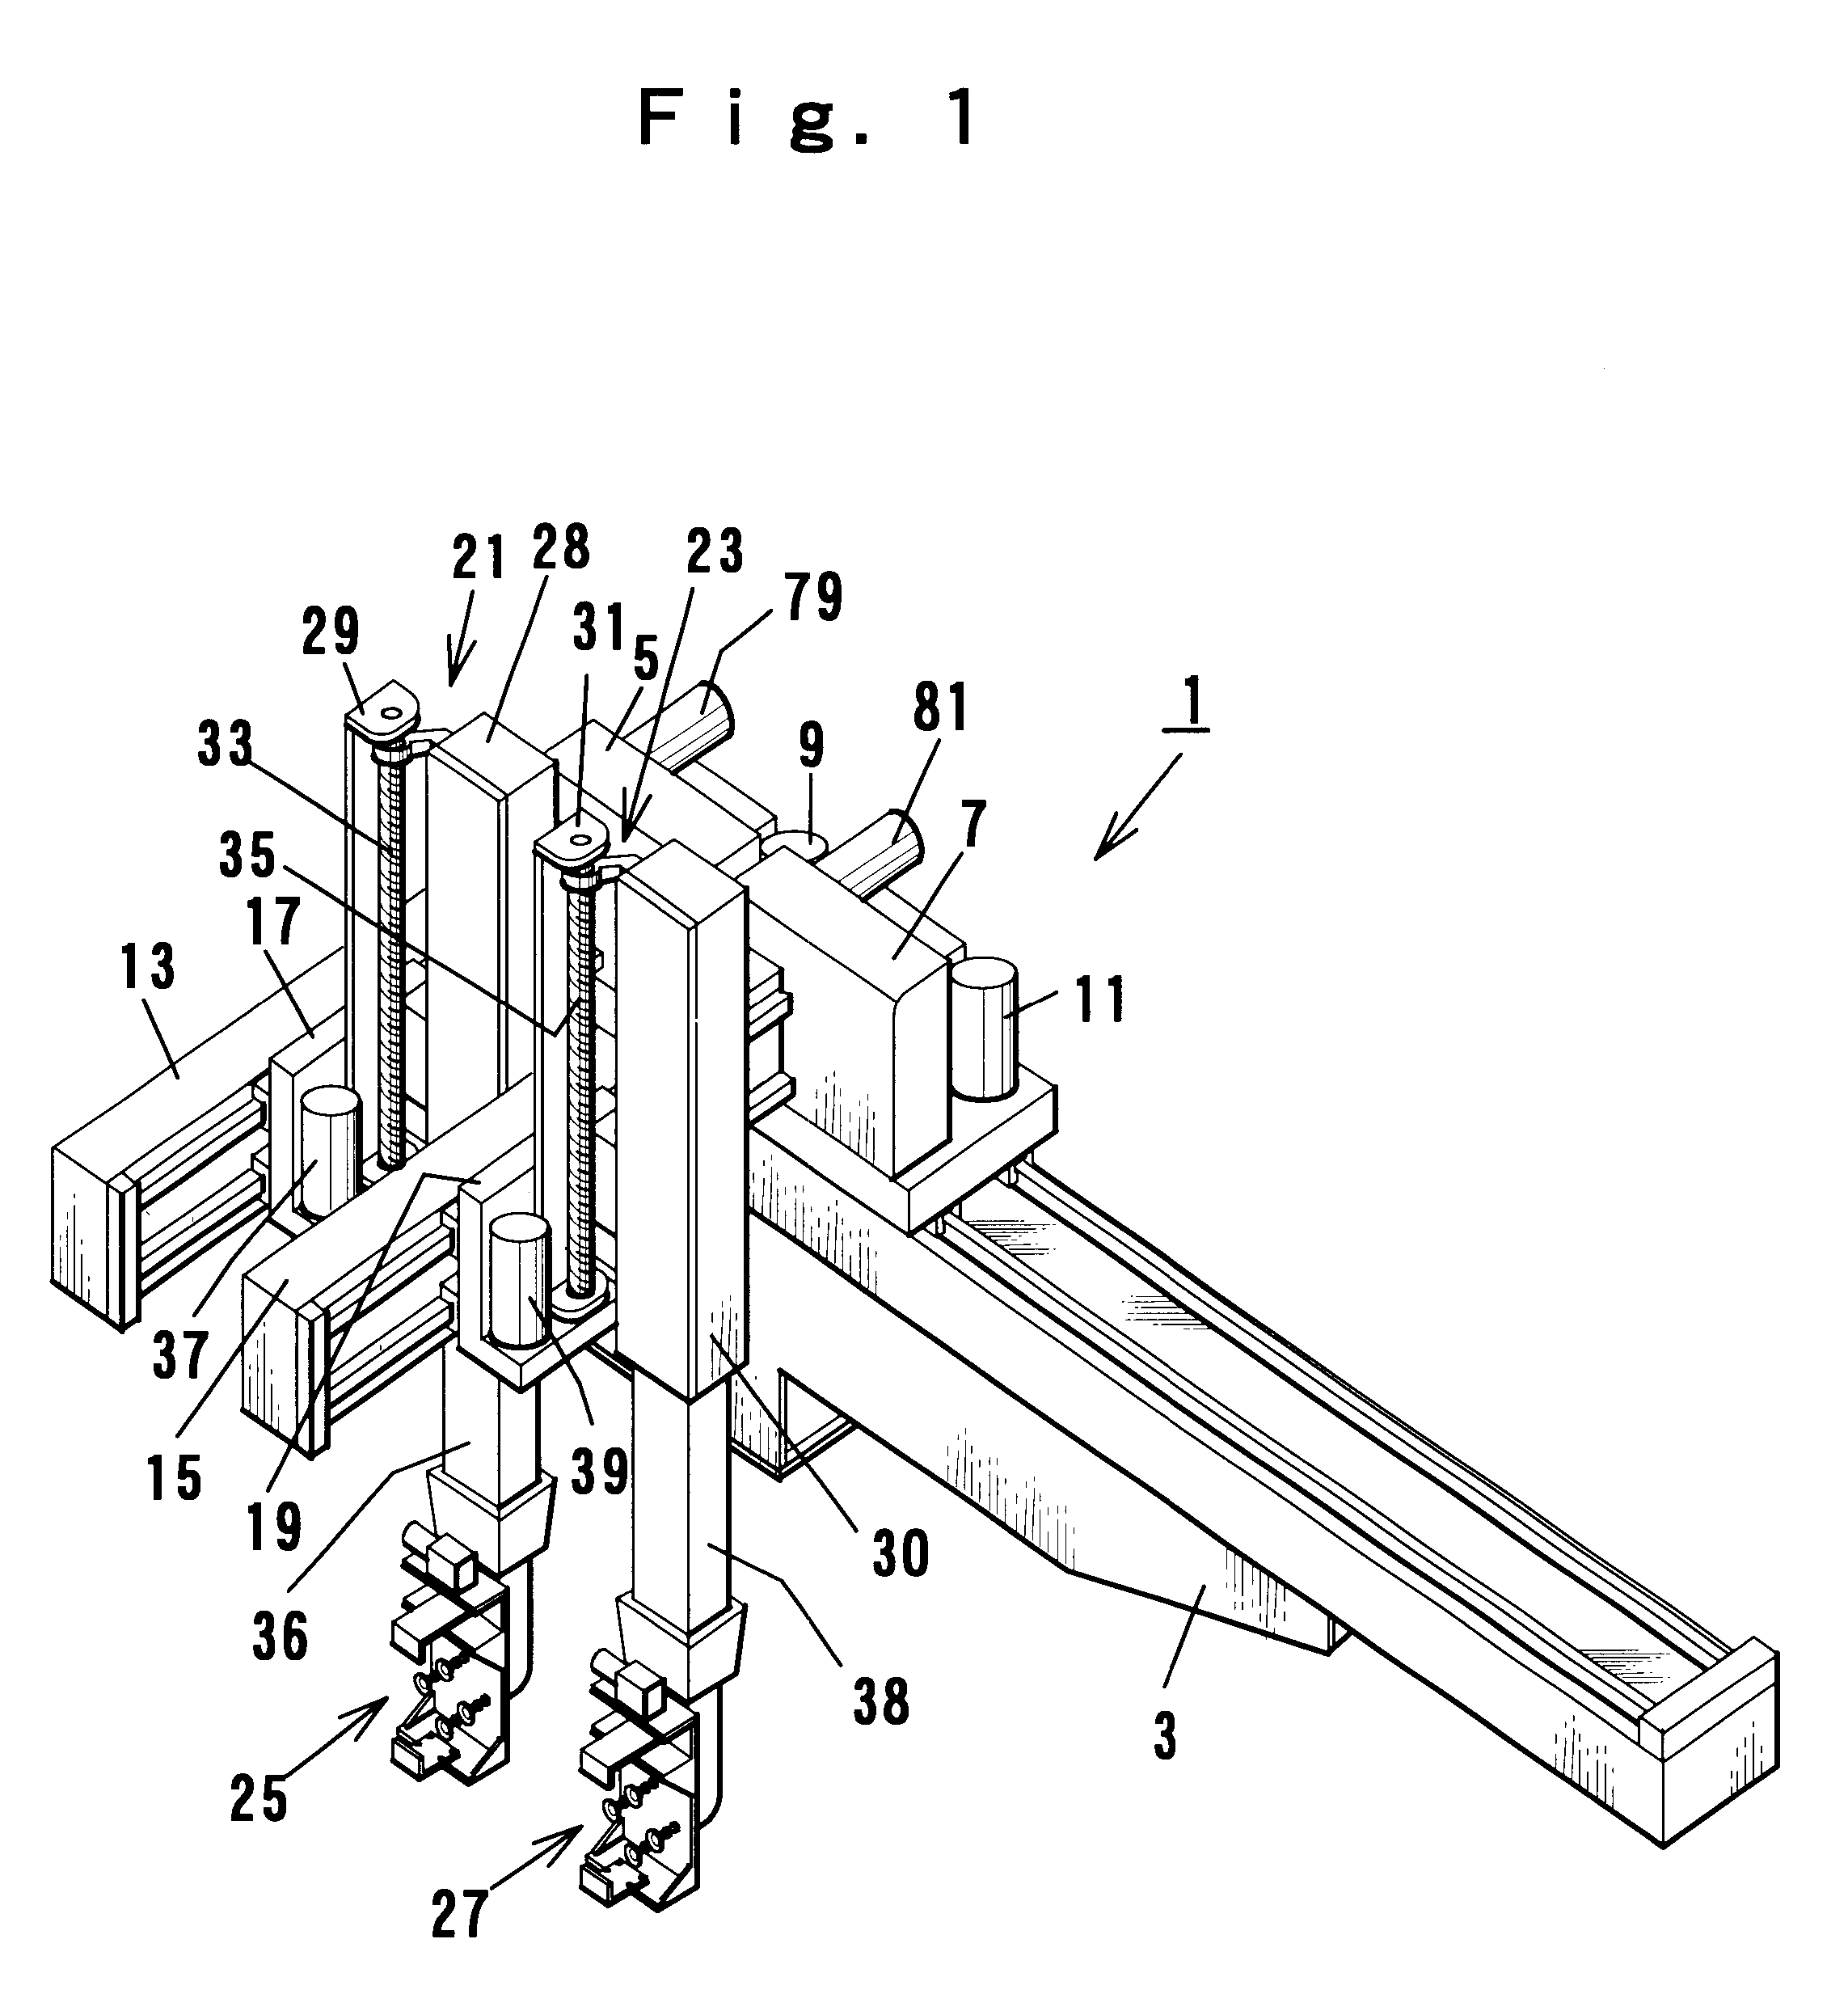 Removal apparatus for molded product and method for removing molded products